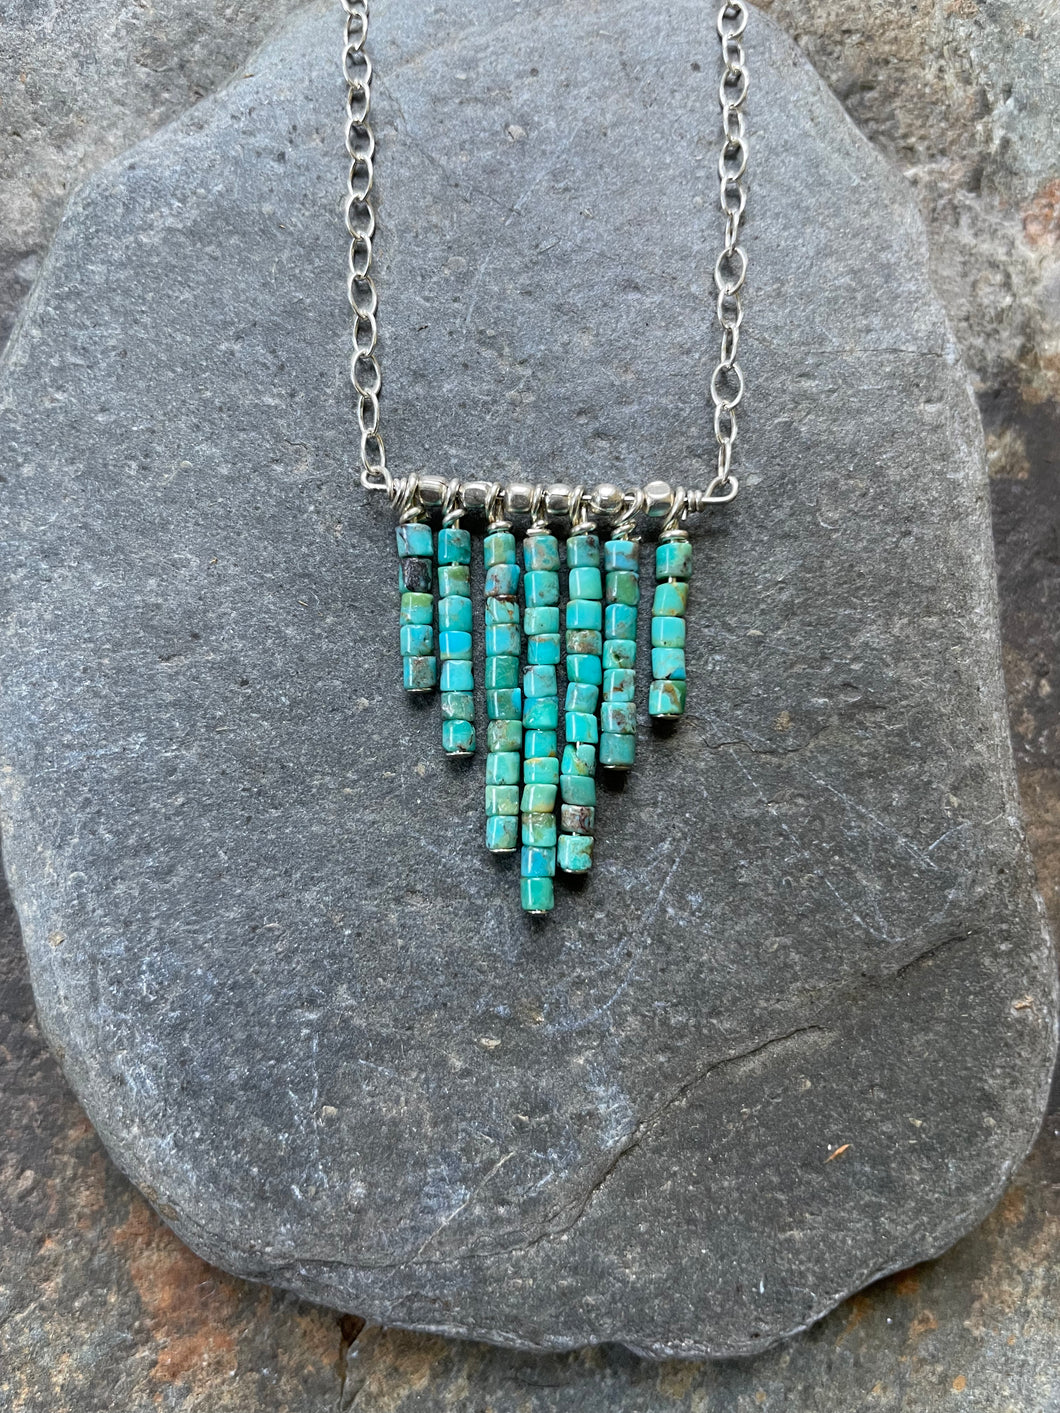 Turquoise waterfall necklace. Raw turquoise beads and accents of silver.